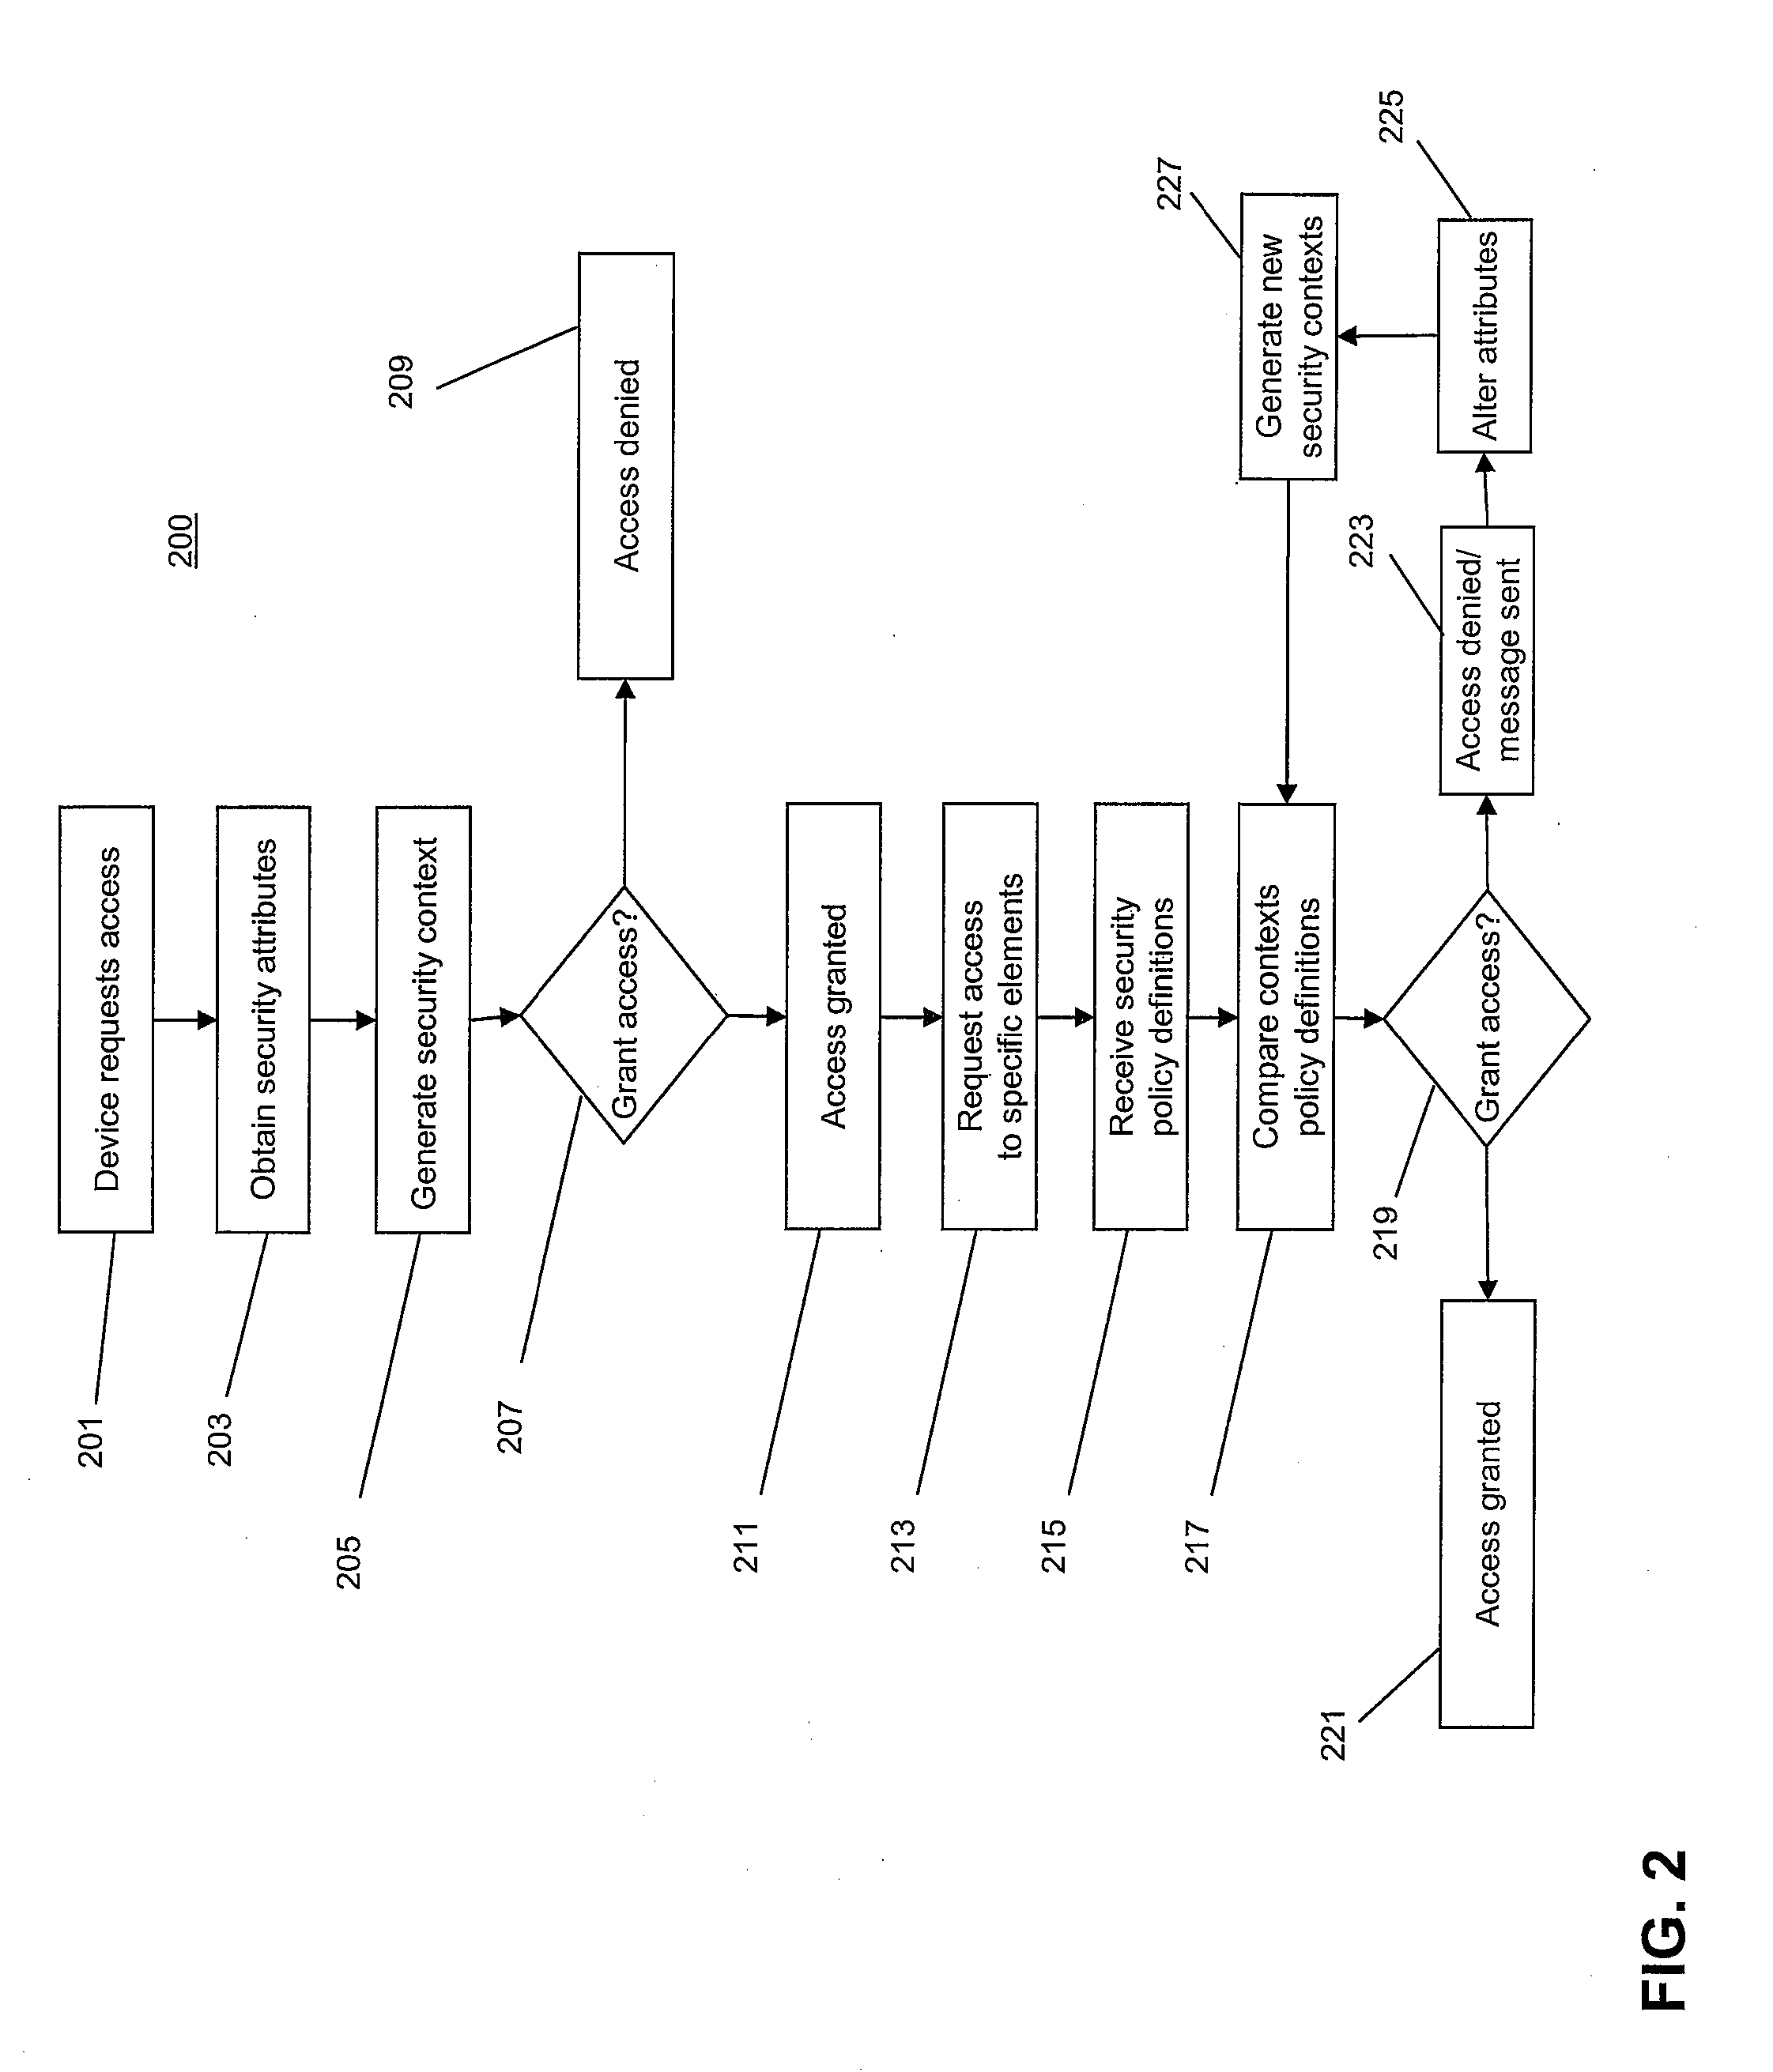 System and method for multi-context policy management